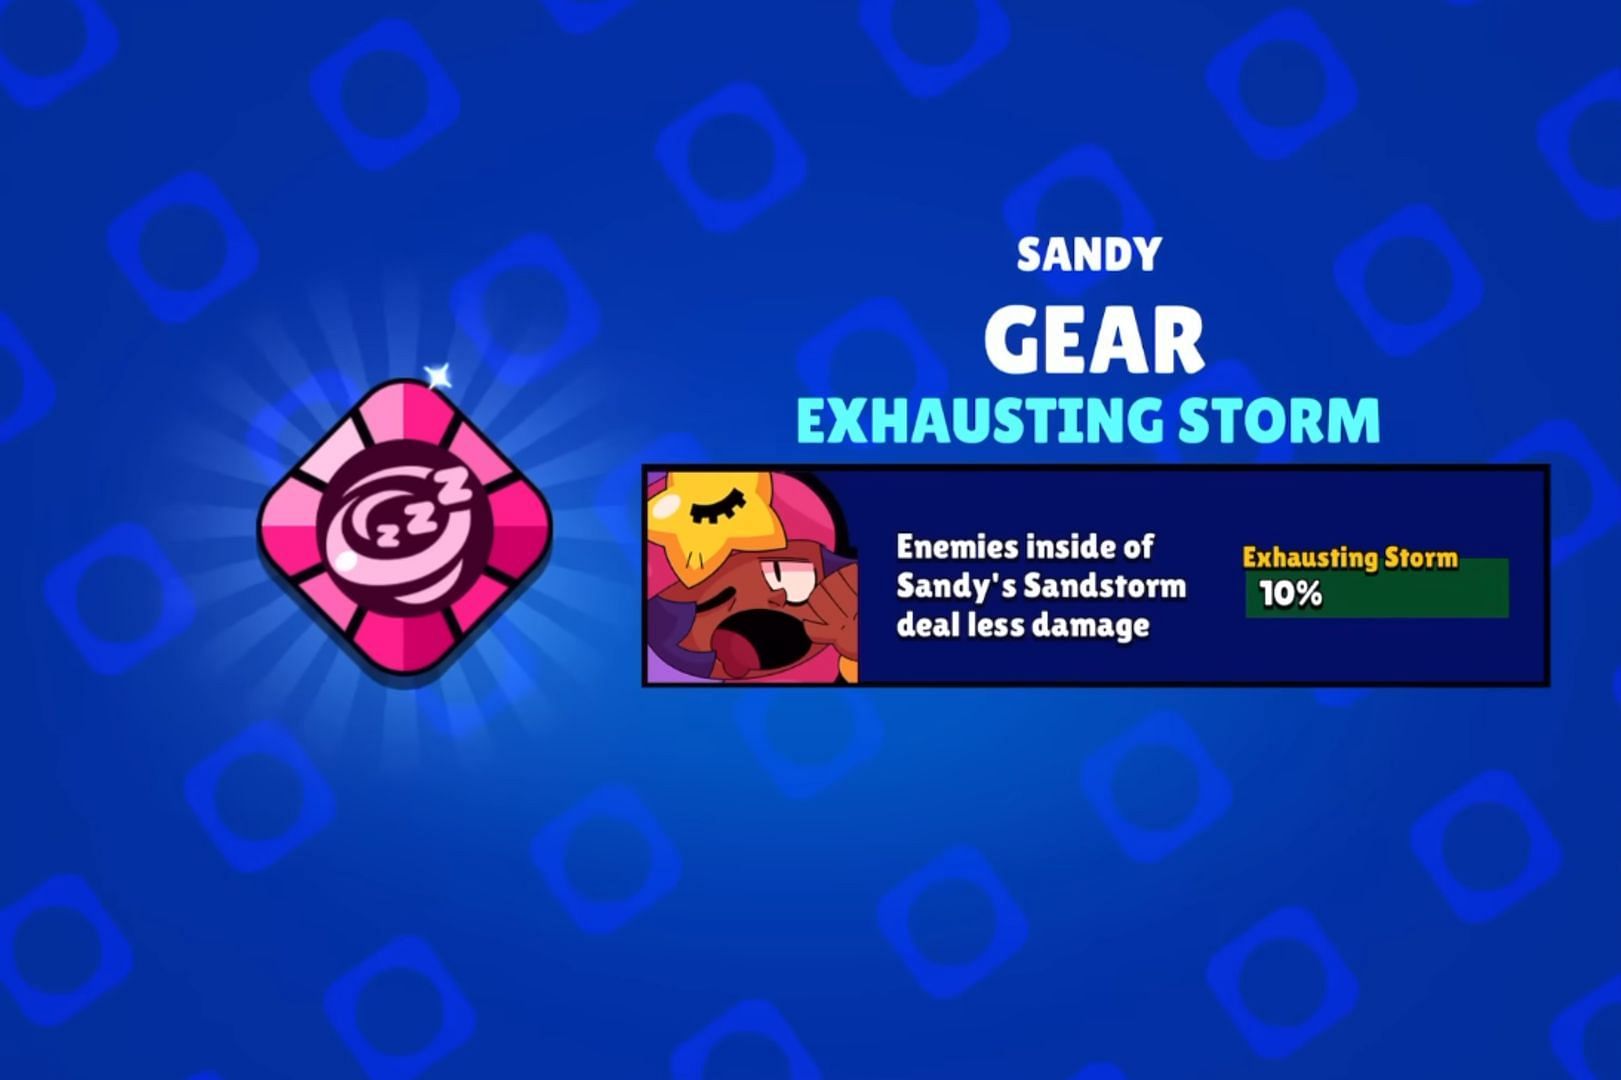 Exhausting Storm Mythic Gear (Image via Supercell)